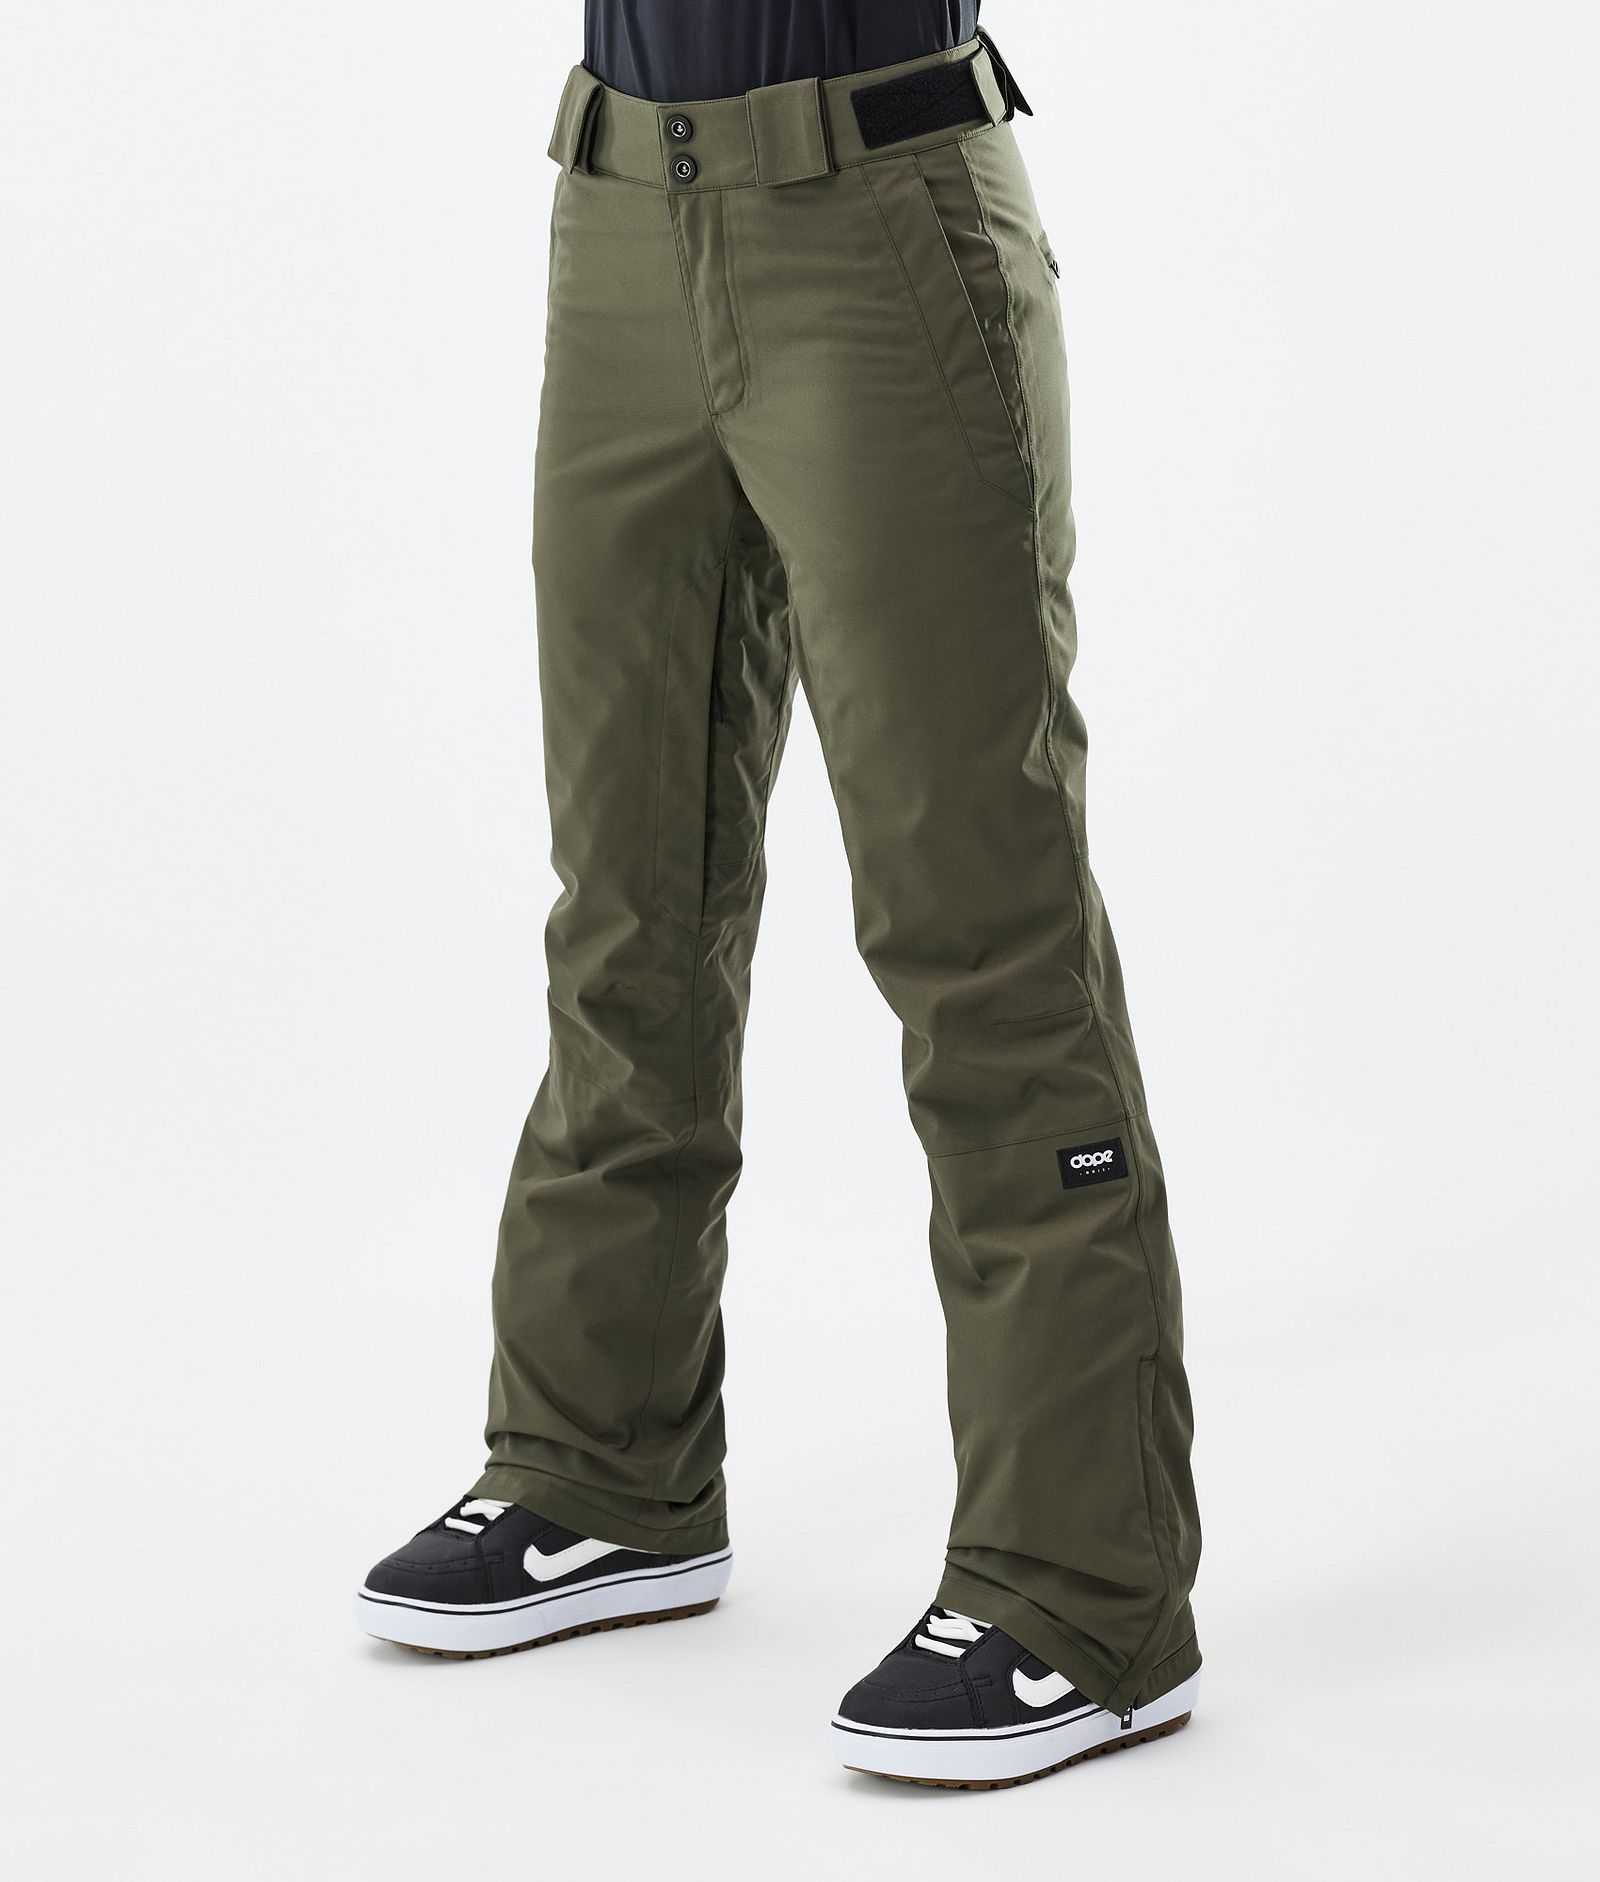 Con W Snowboard Pants Women Olive Green, Image 1 of 6